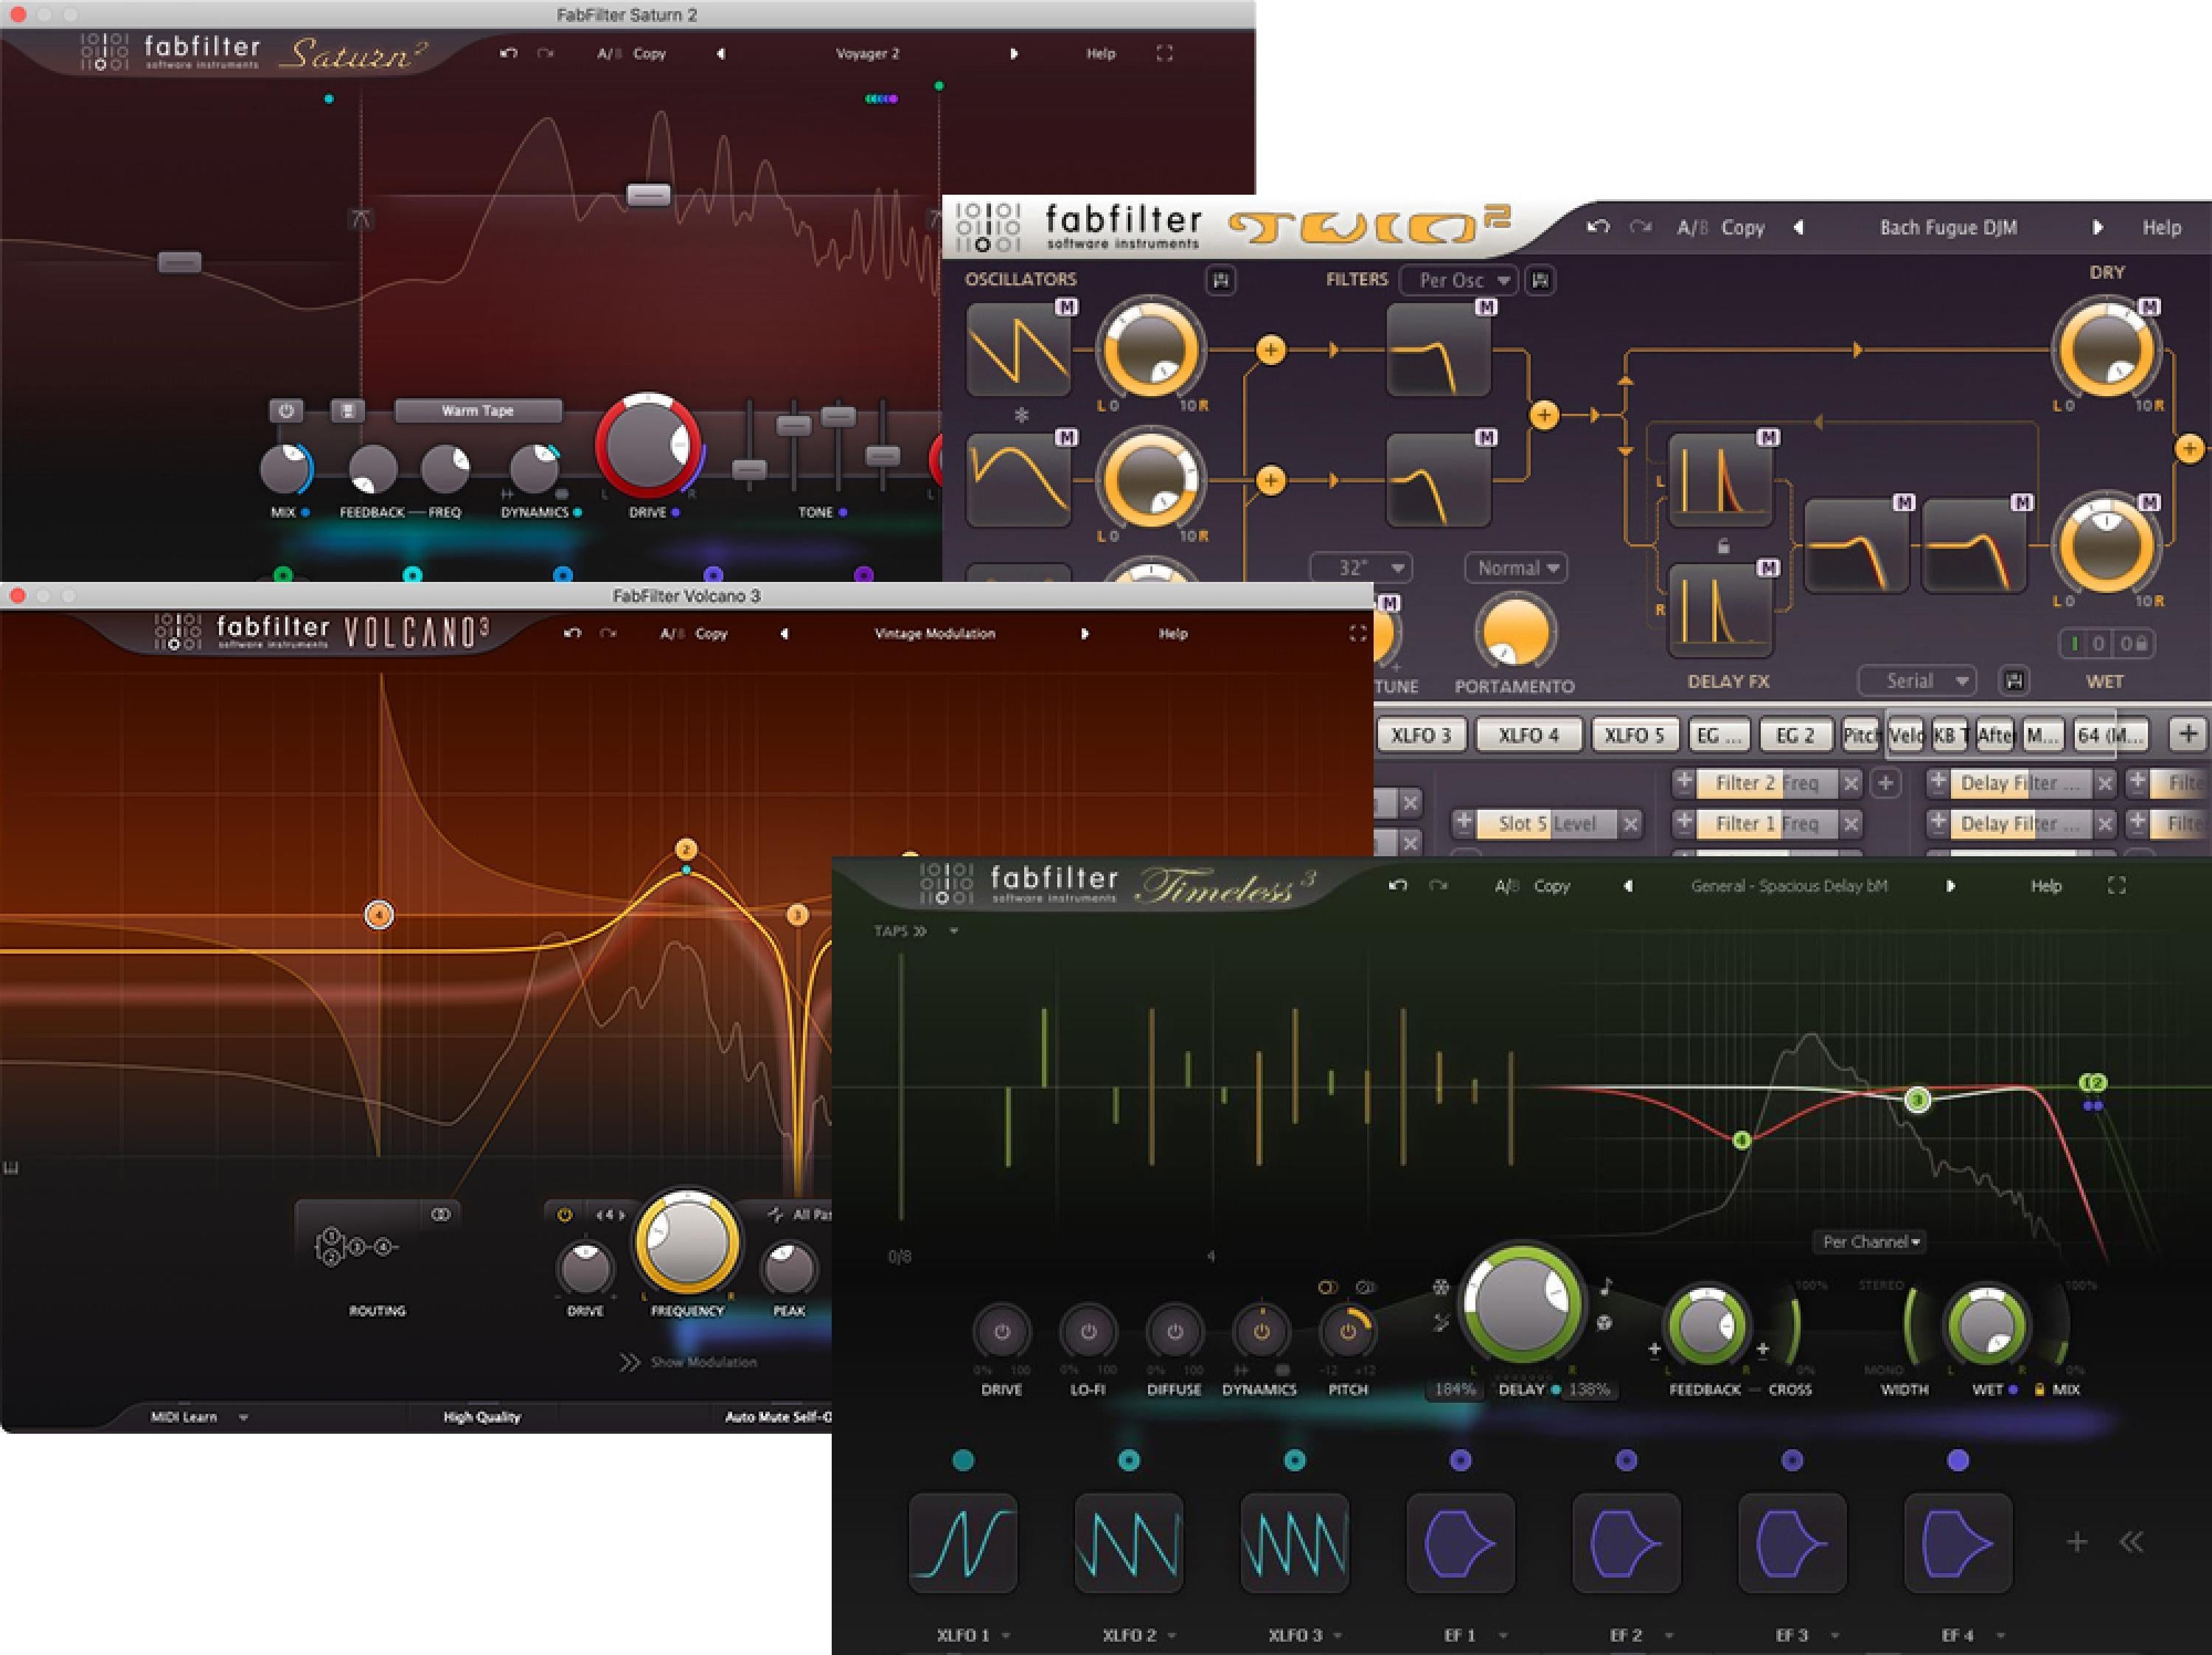 FabFilter Creative Bundle Plug-in Collection